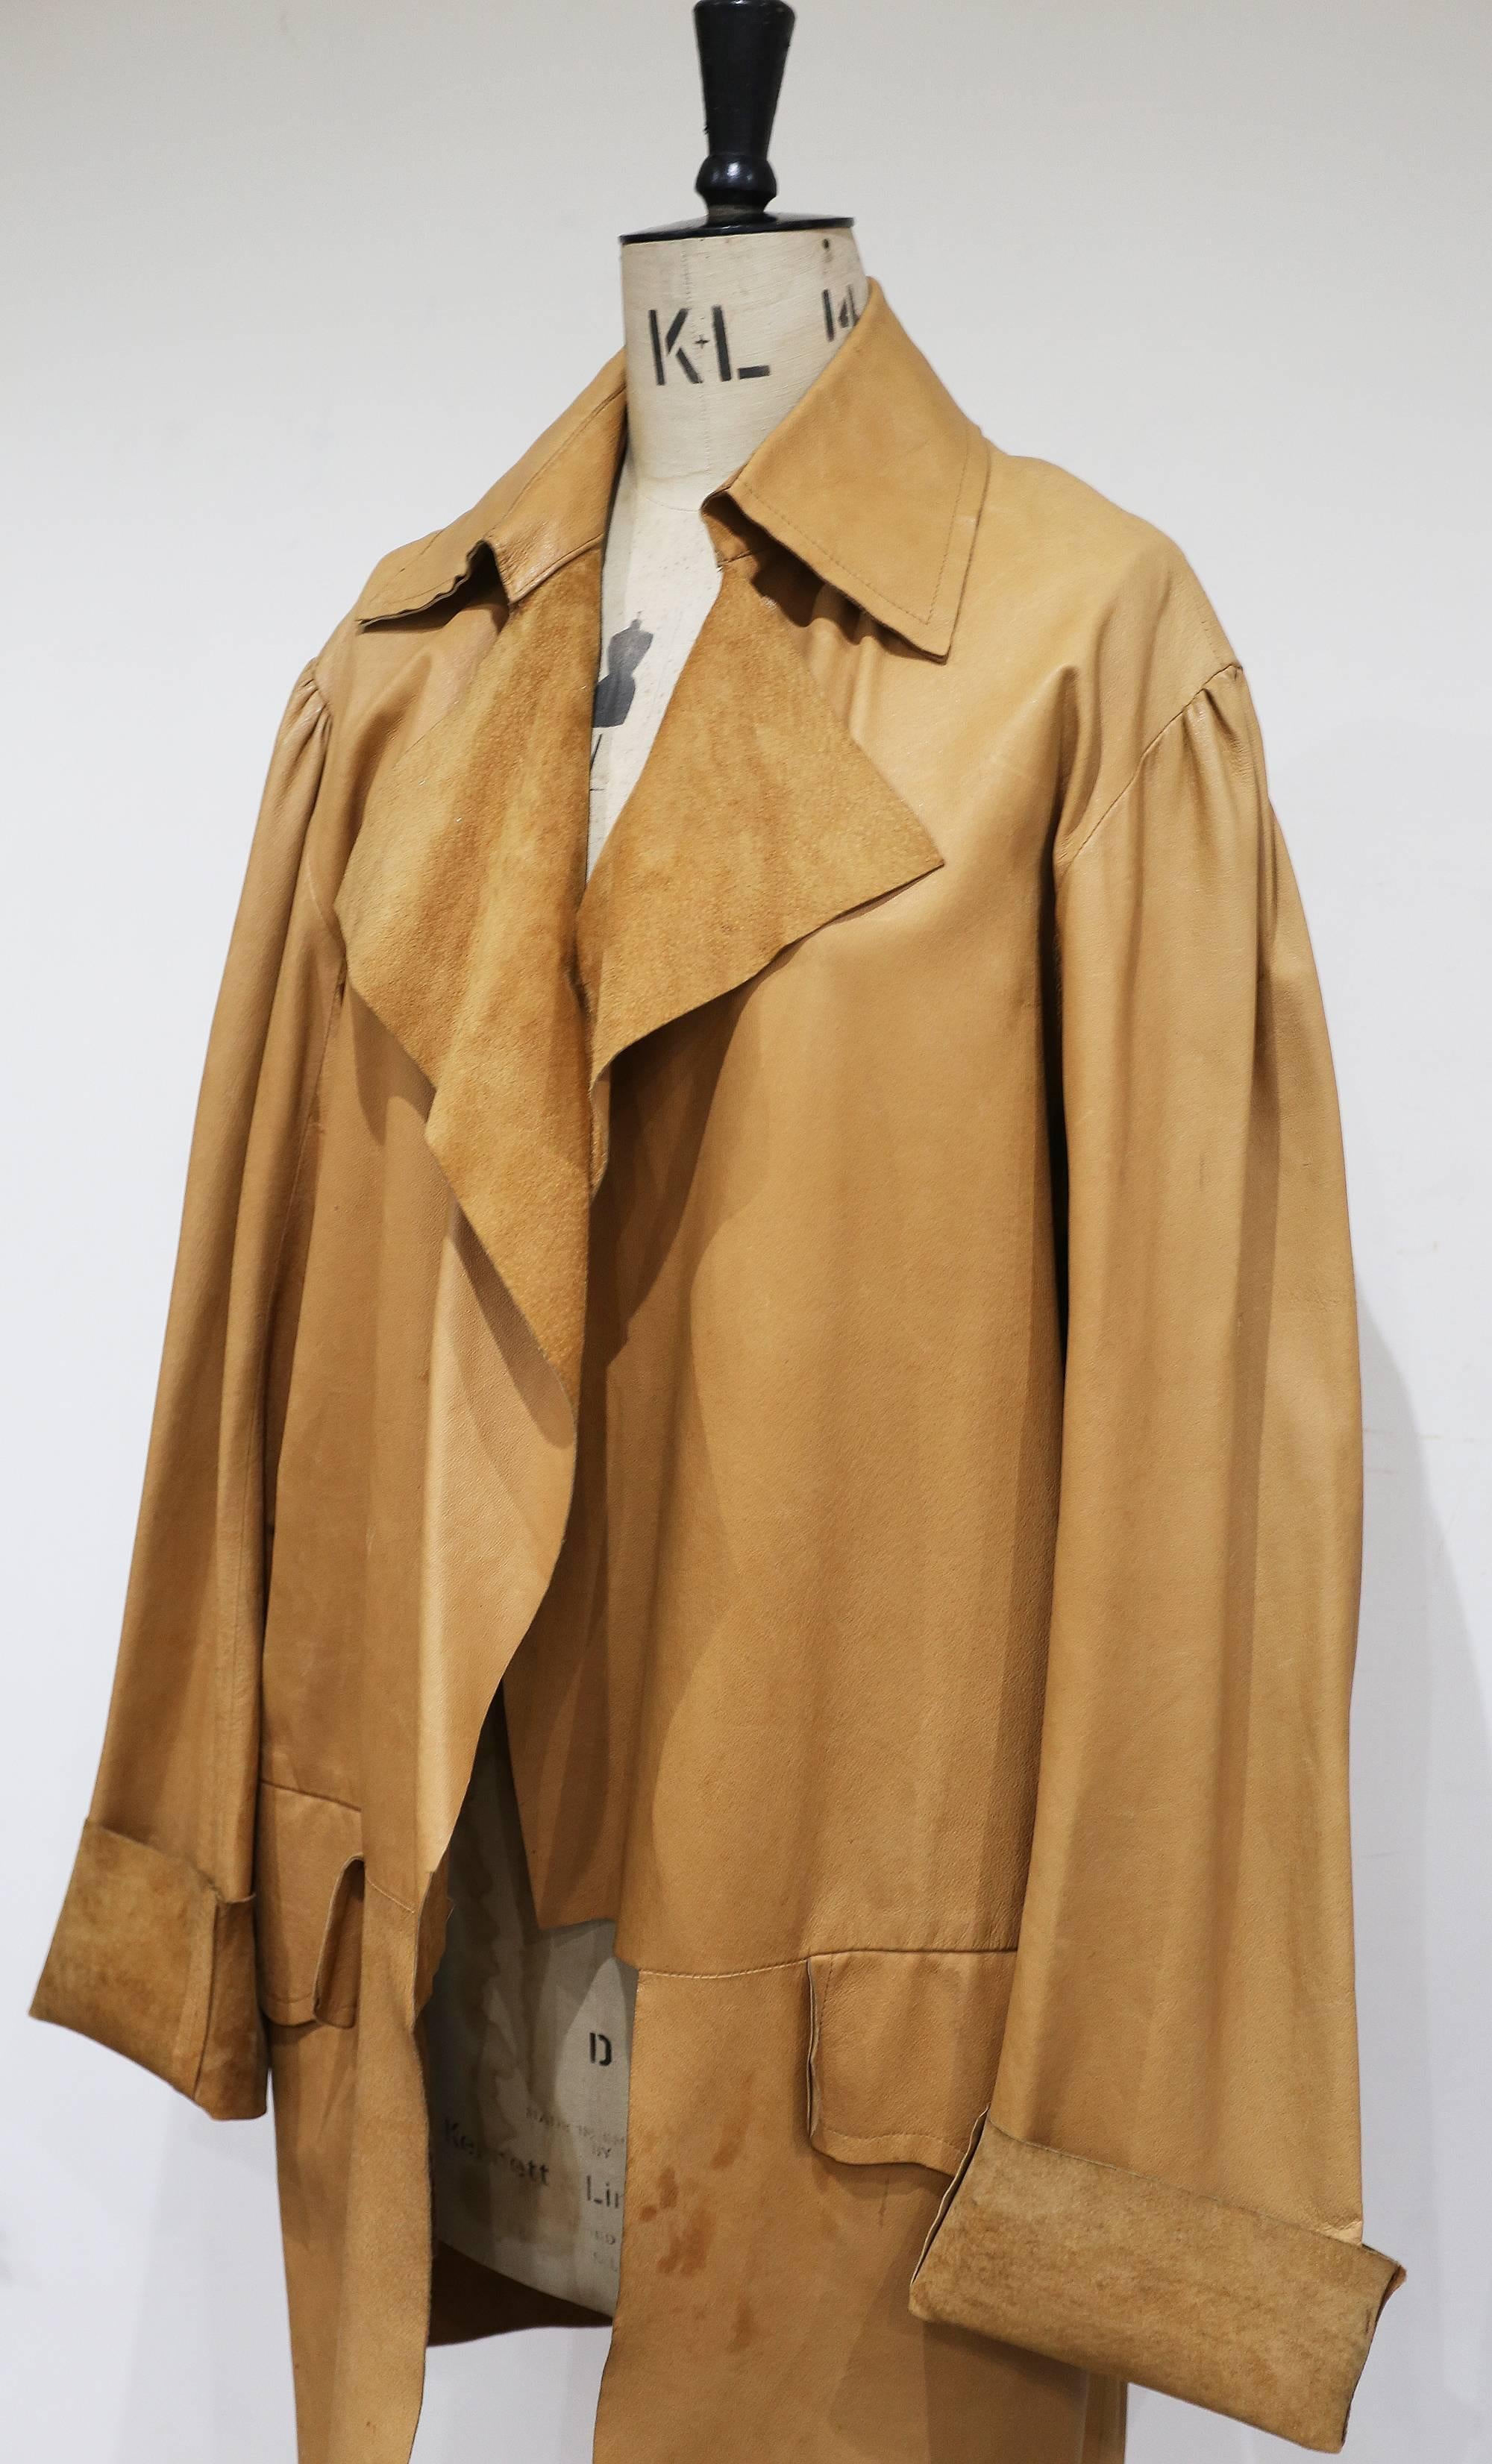 Extremely rare and highly collectible Pirate coat by Vivienne Westwood and Malcolm Mclaren from their iconic World's End boutique. The coat is oversized and has a raw finish. No closures, to be worn loosely. 

M